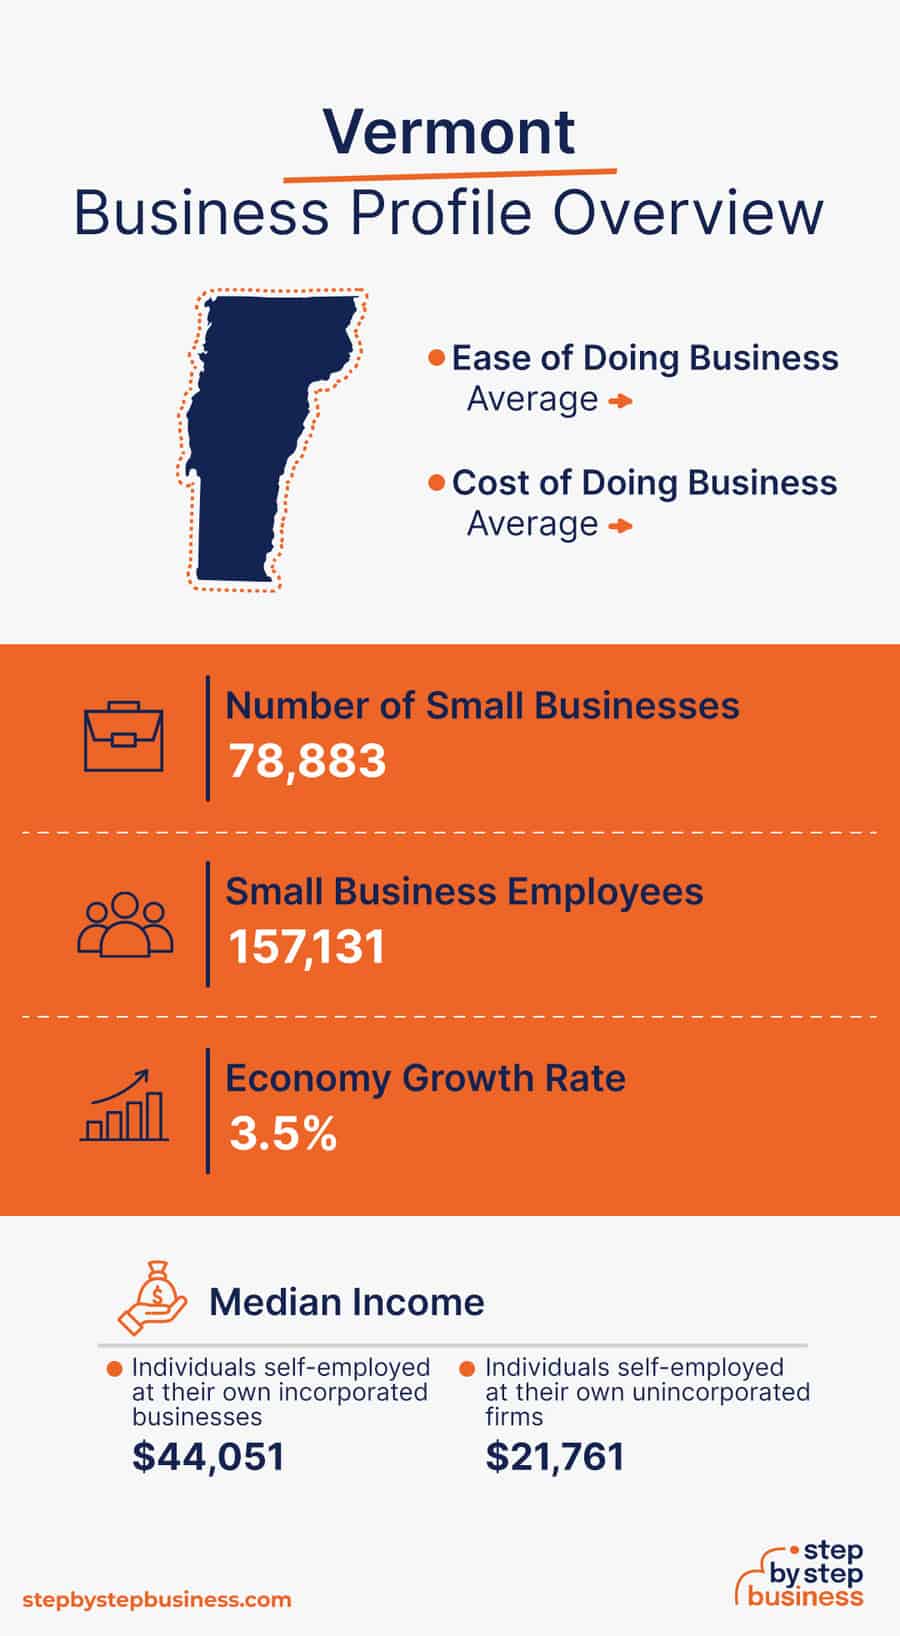 Vermont Business Profile Overview